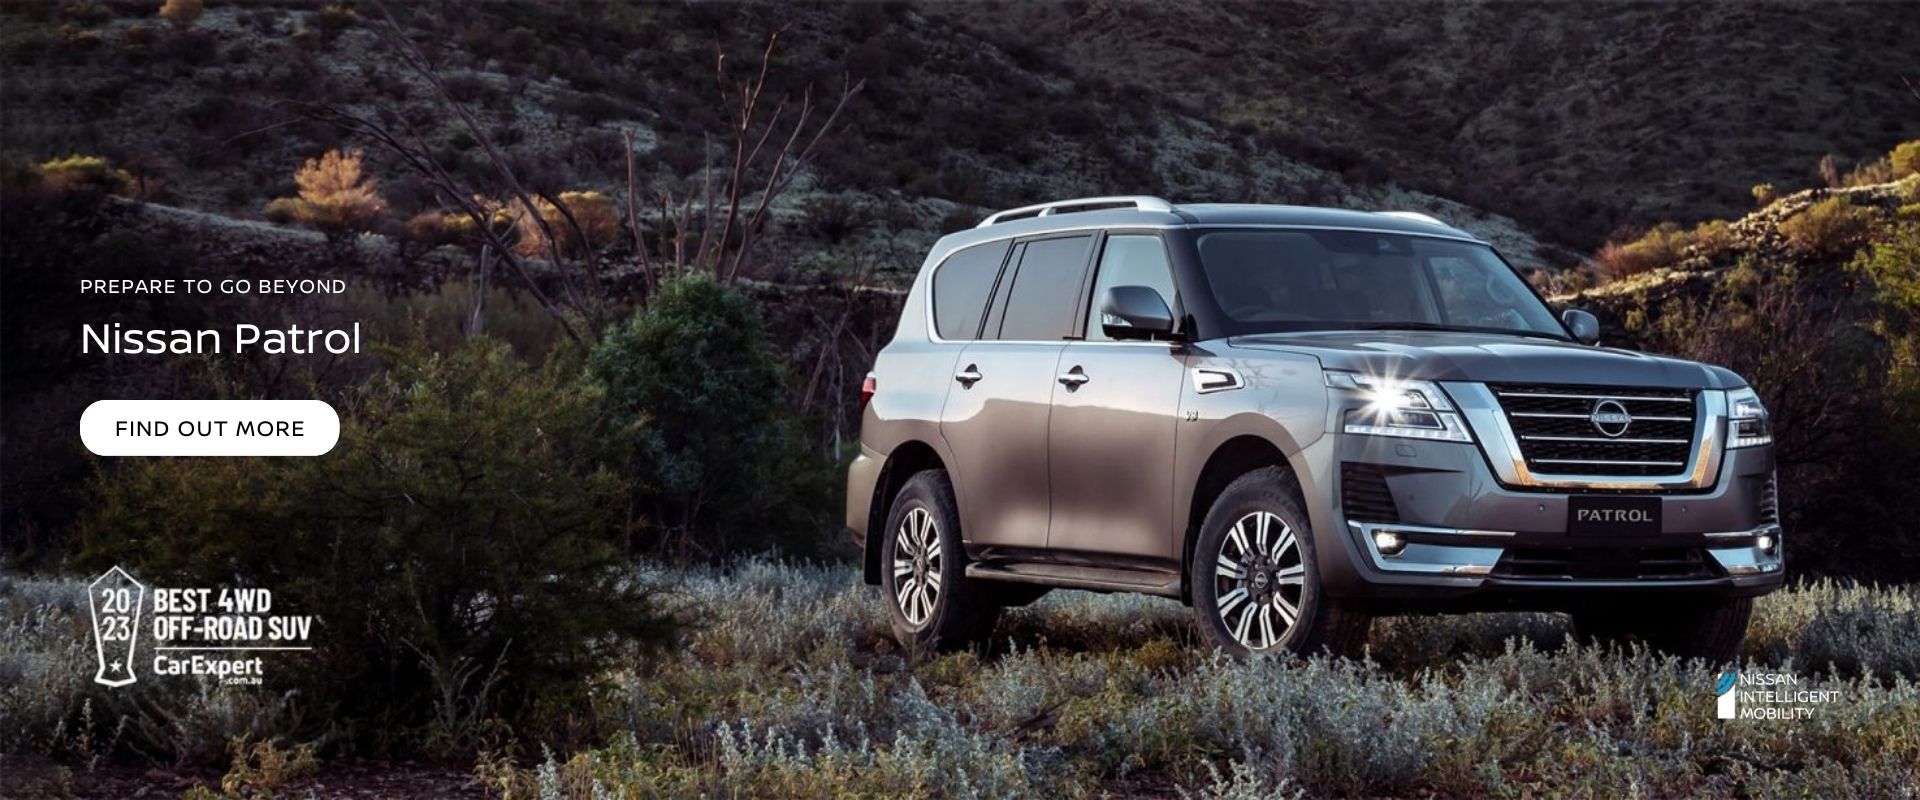 Prepare to go beyond. Nissan Patrol. Find out more. 